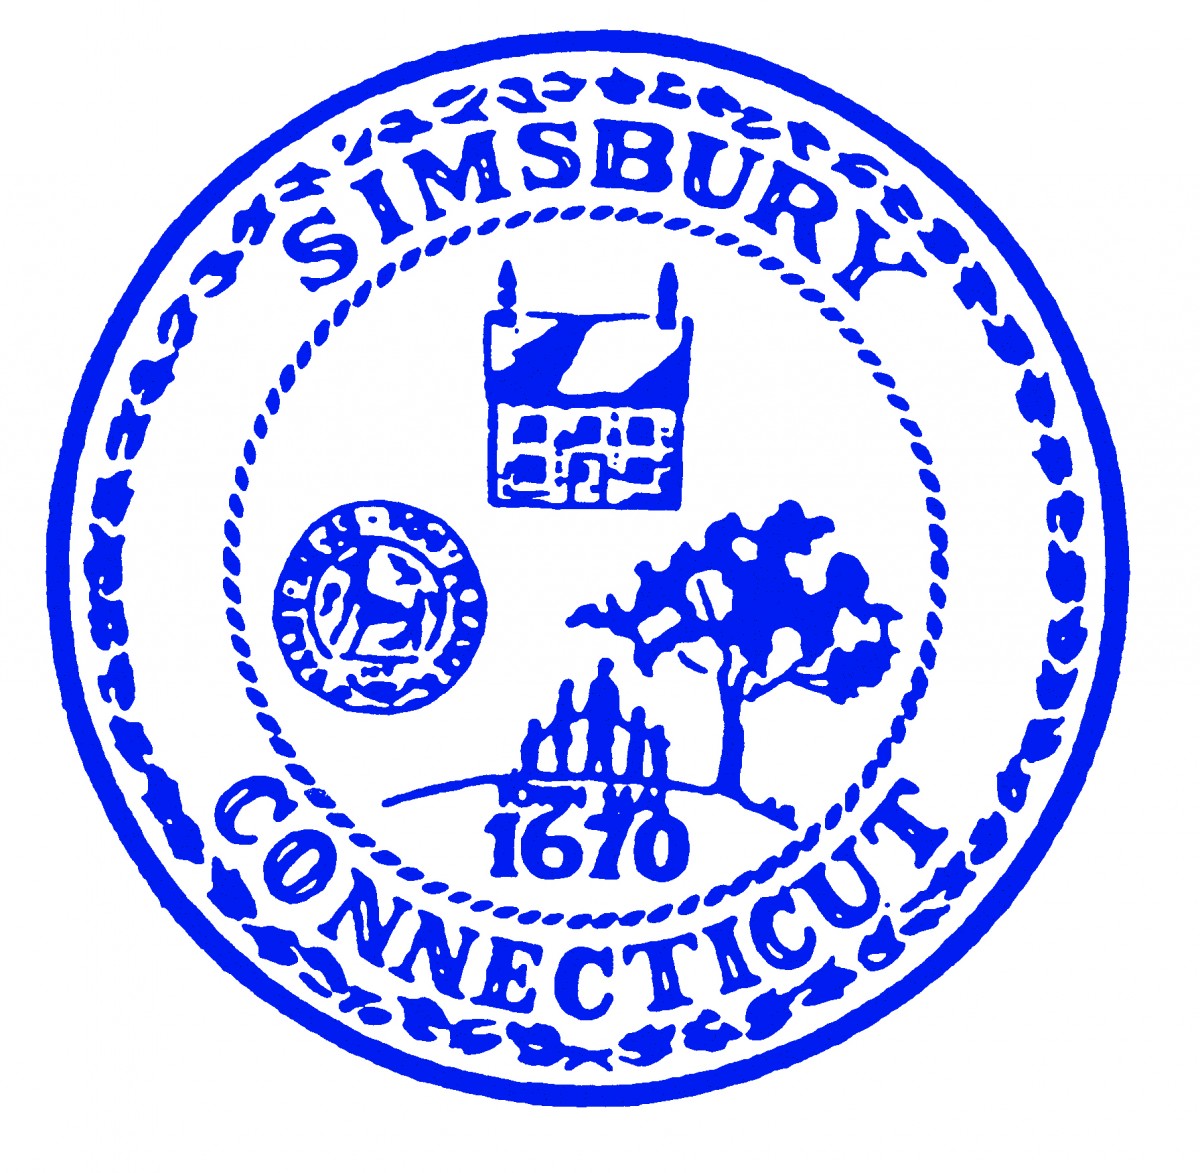 Personal Injury Attorneys in Simsbury, CT